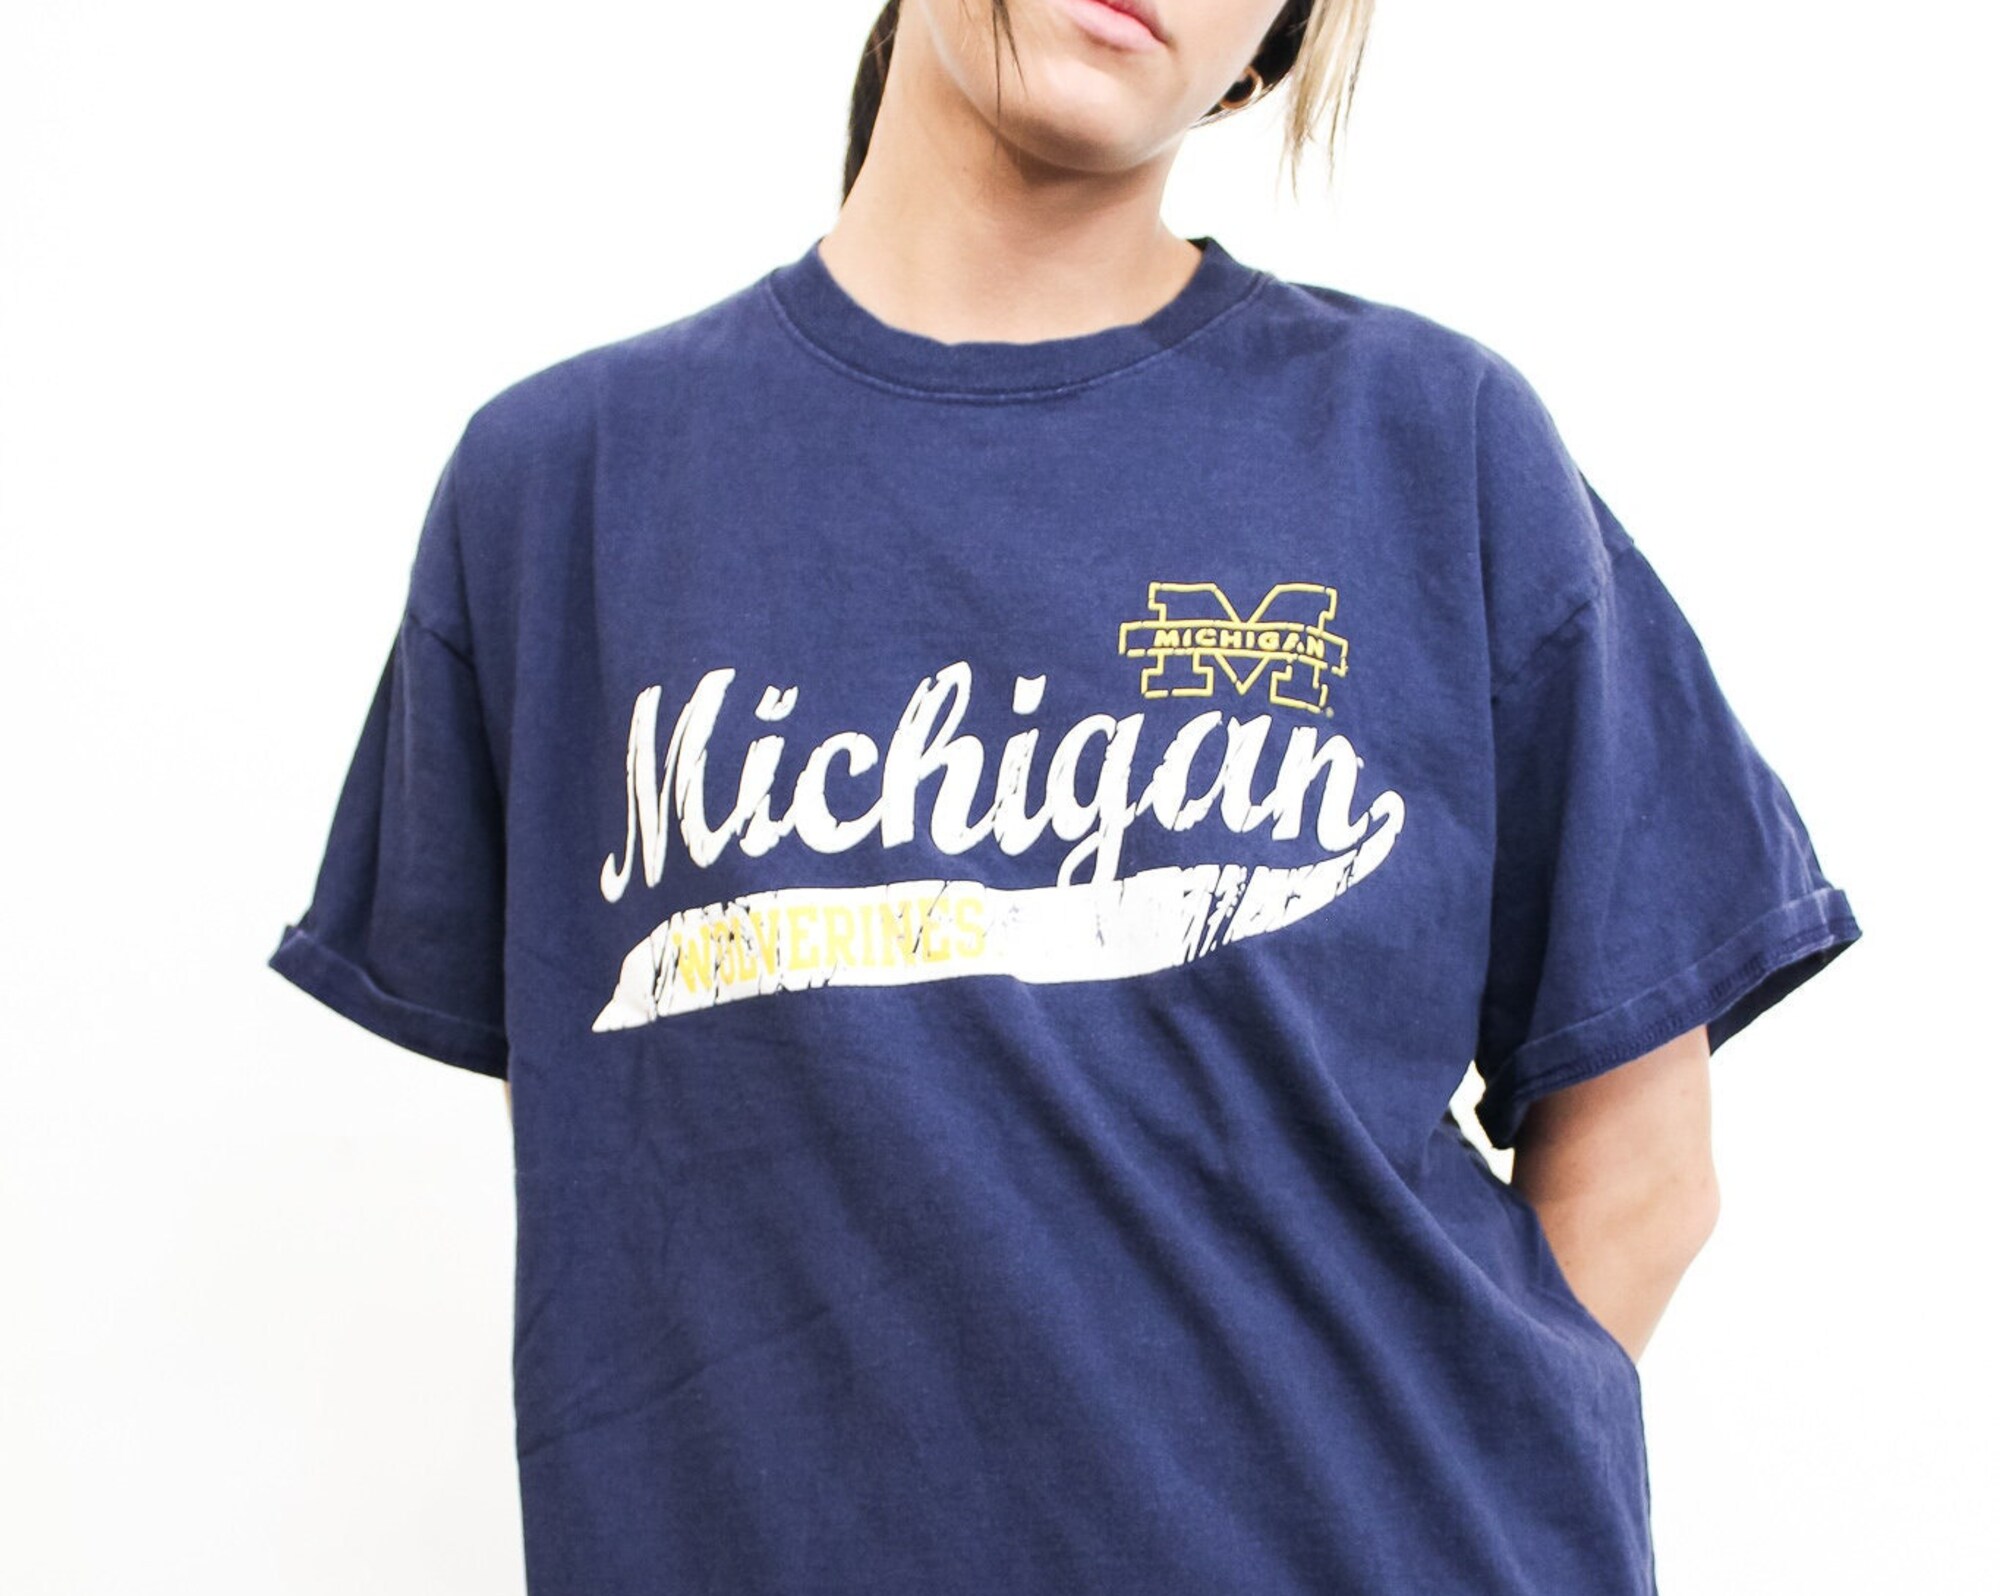 Discover University of Michigan Vintage Tee - XL